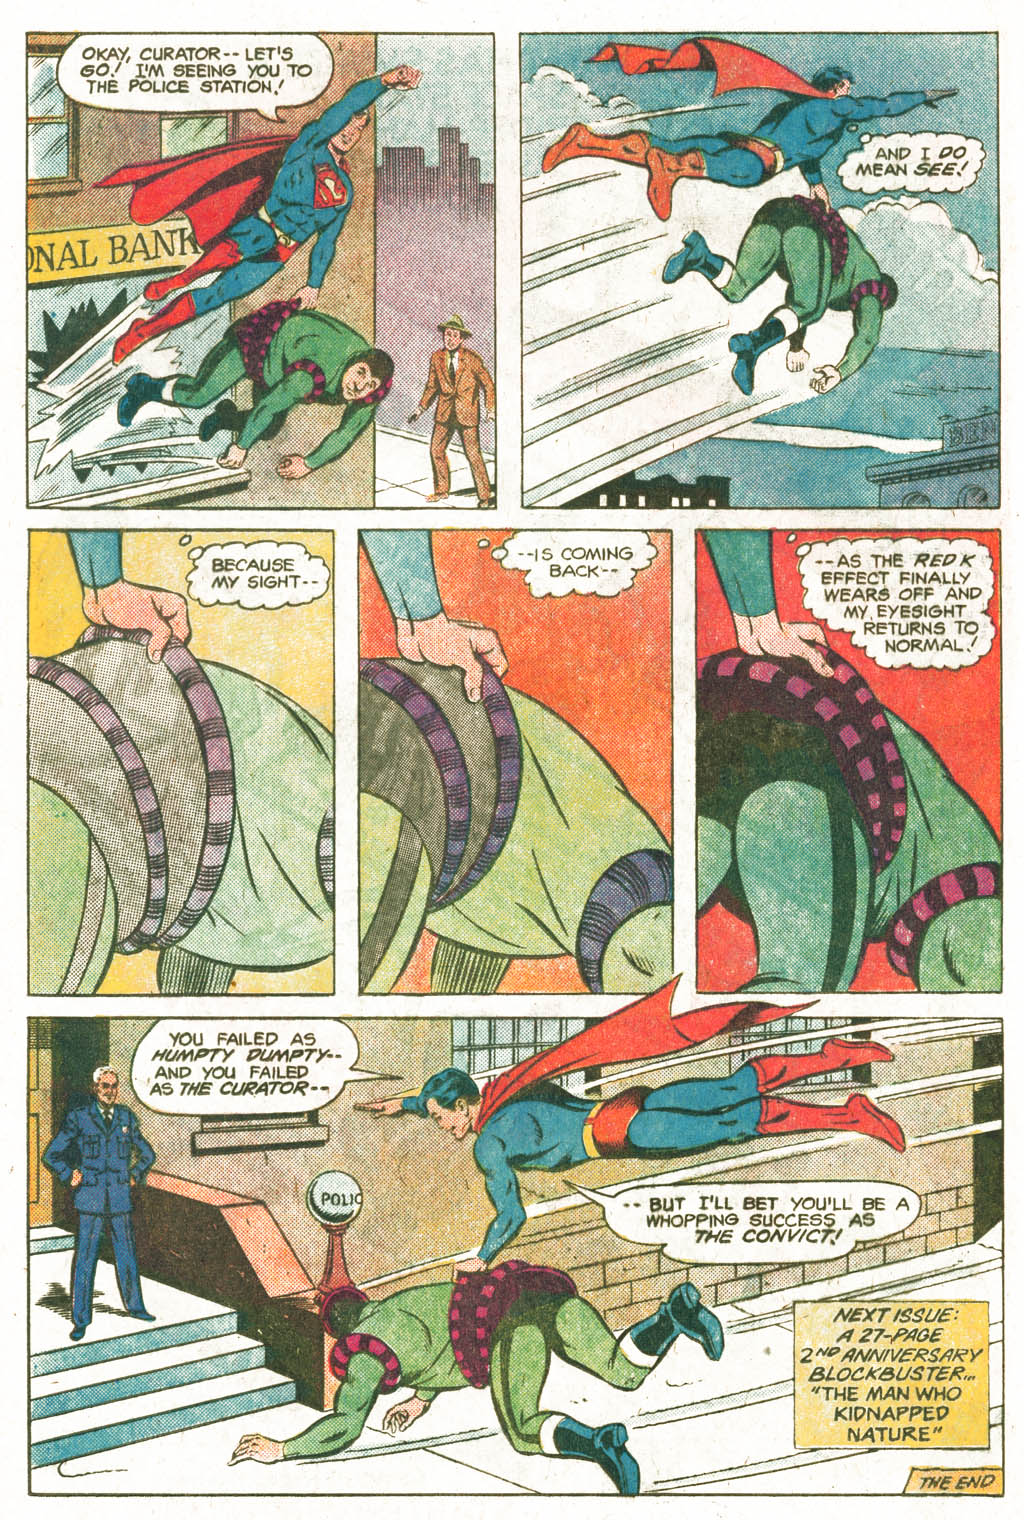 The New Adventures of Superboy 24 Page 19